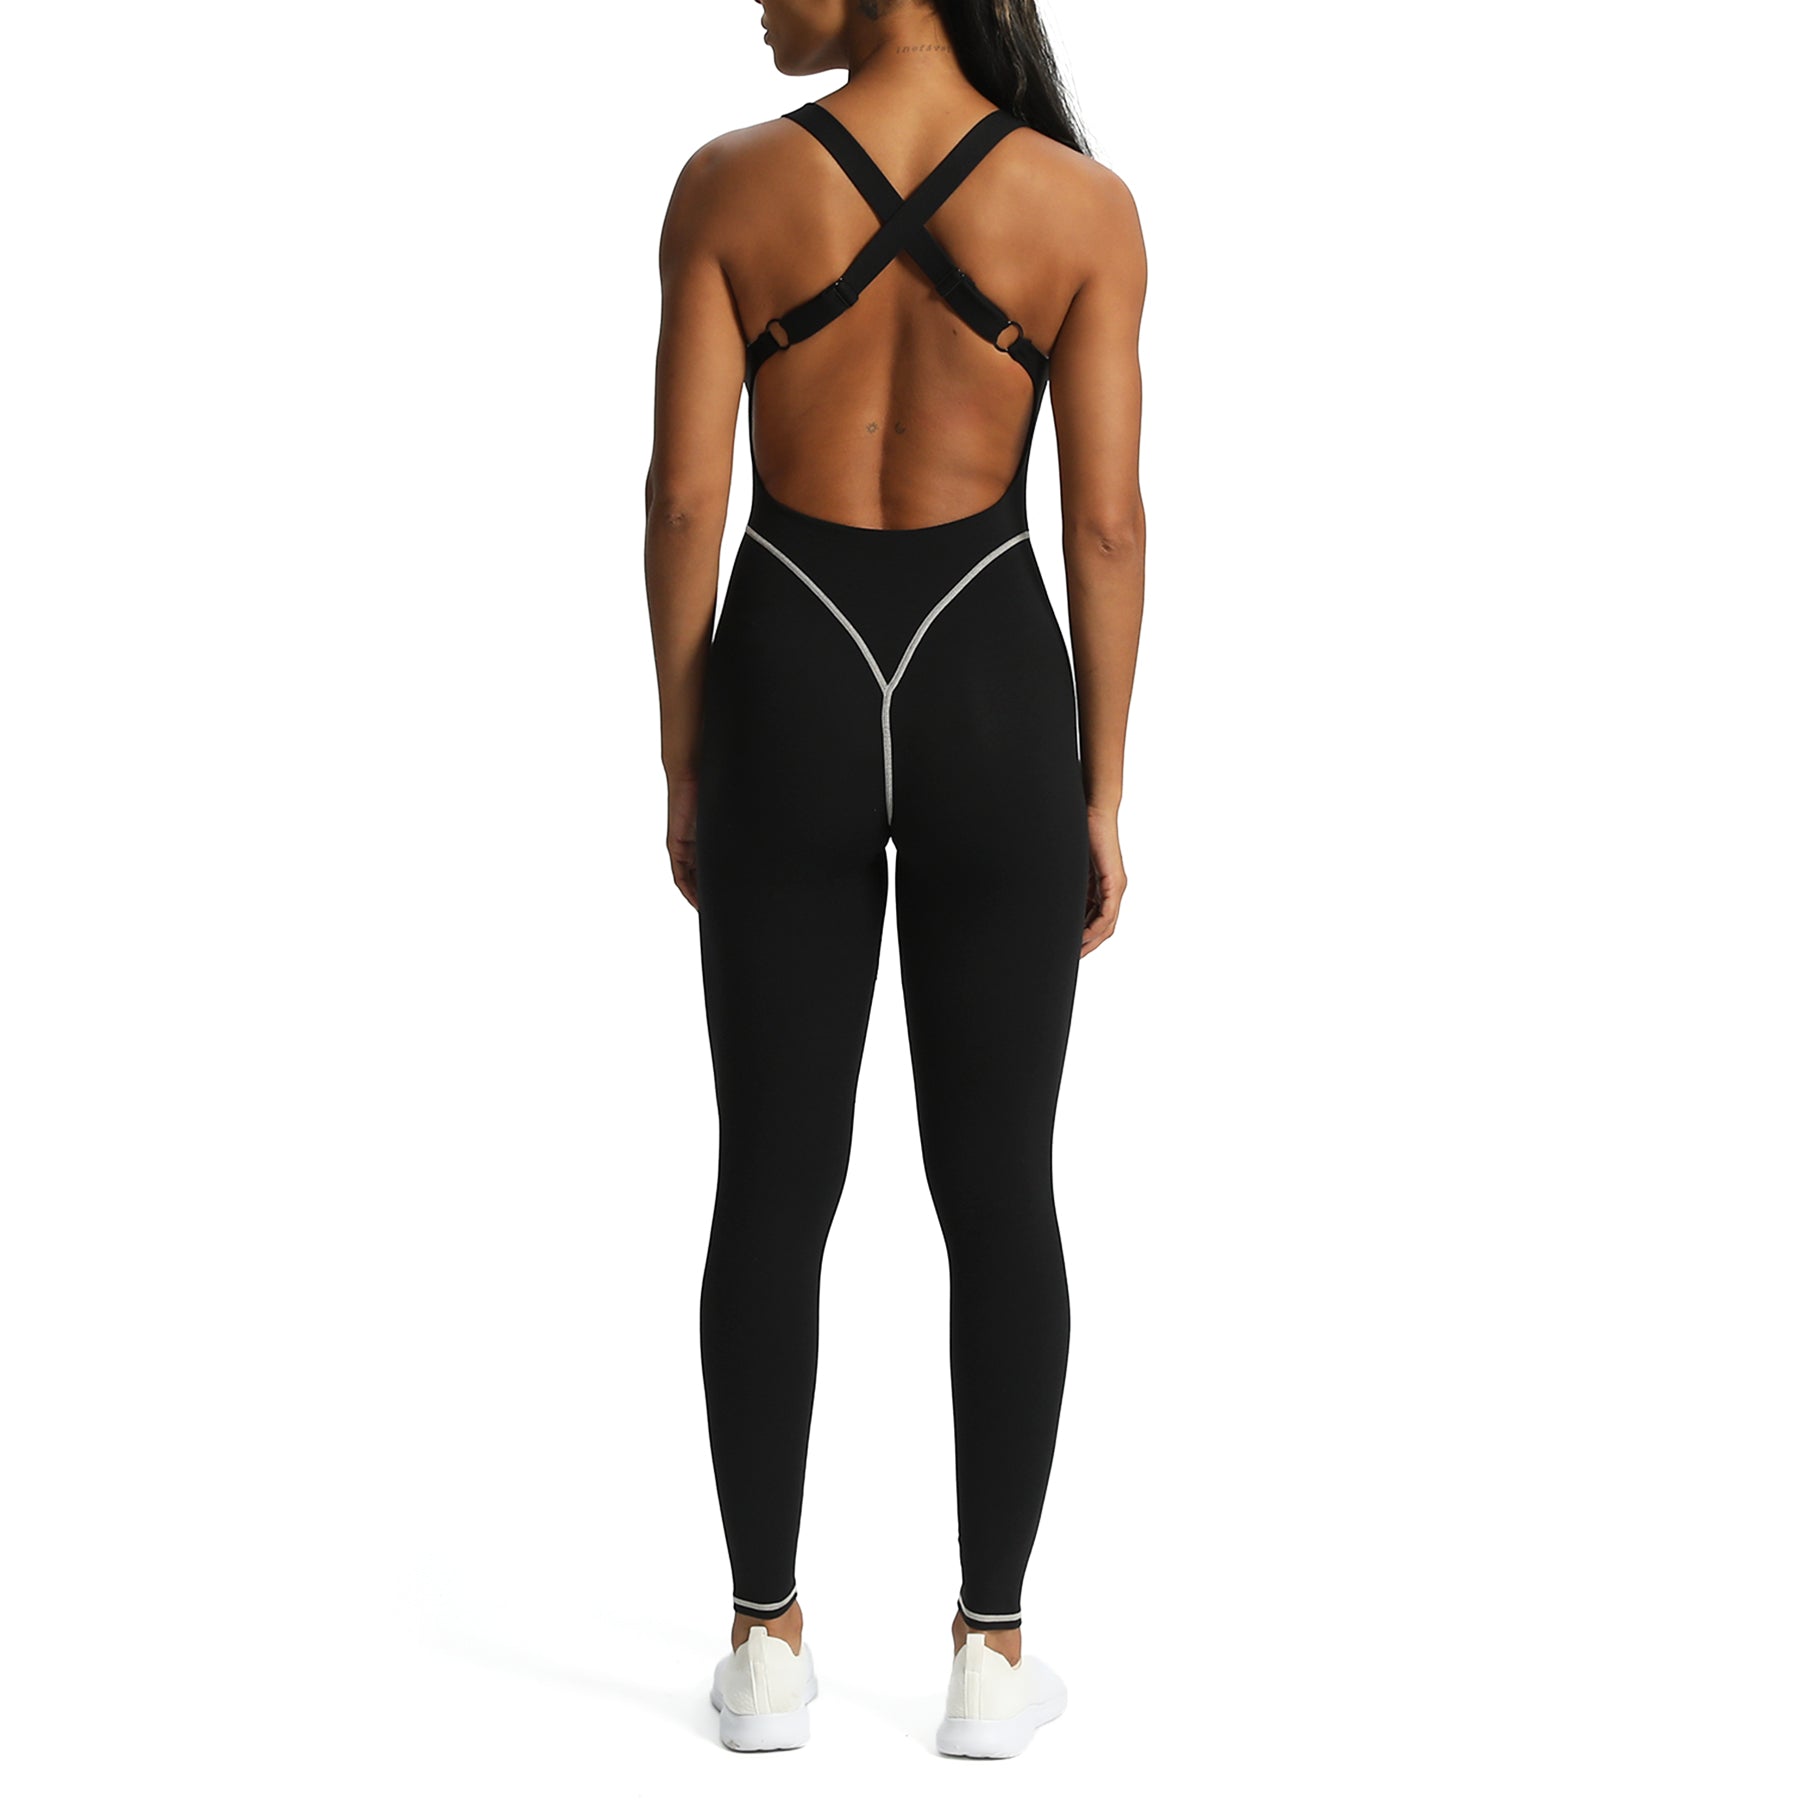 Aoxjox "Lexi Lined" Adjustable Full Bodysuit